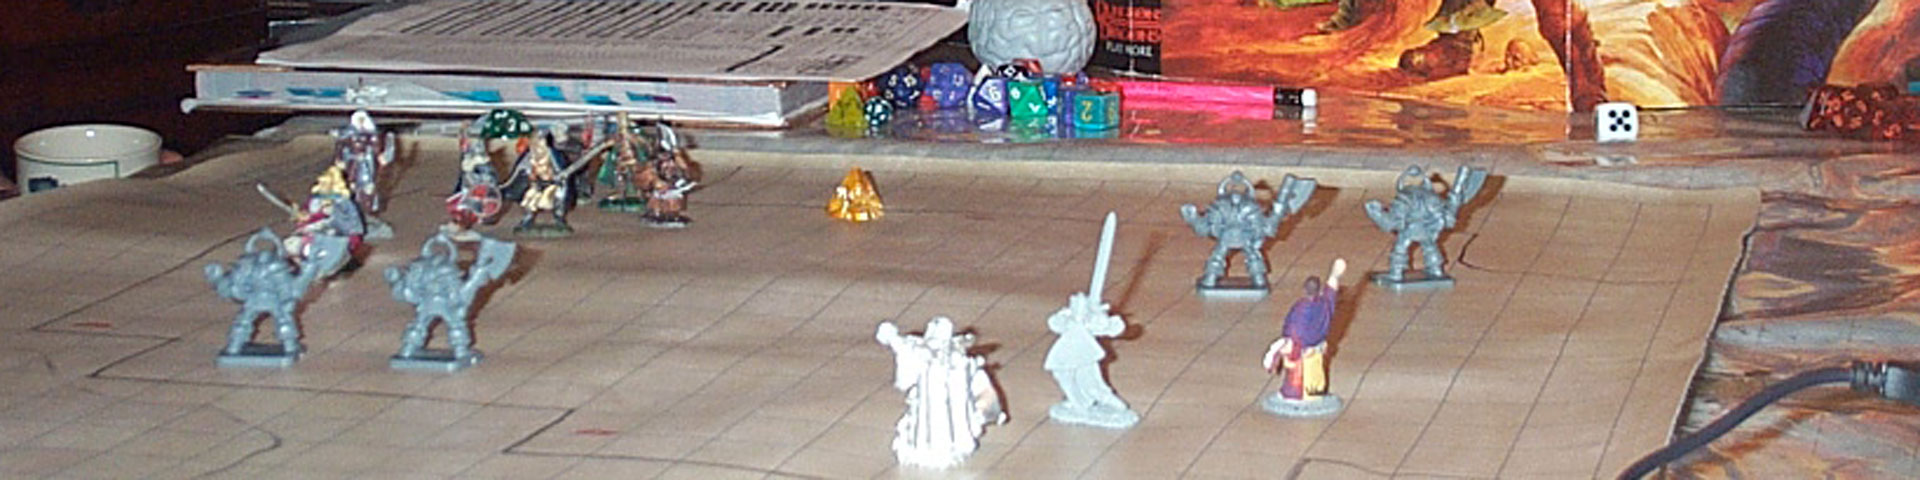 A close-up view of small fantasy figures on a gridded battle map.